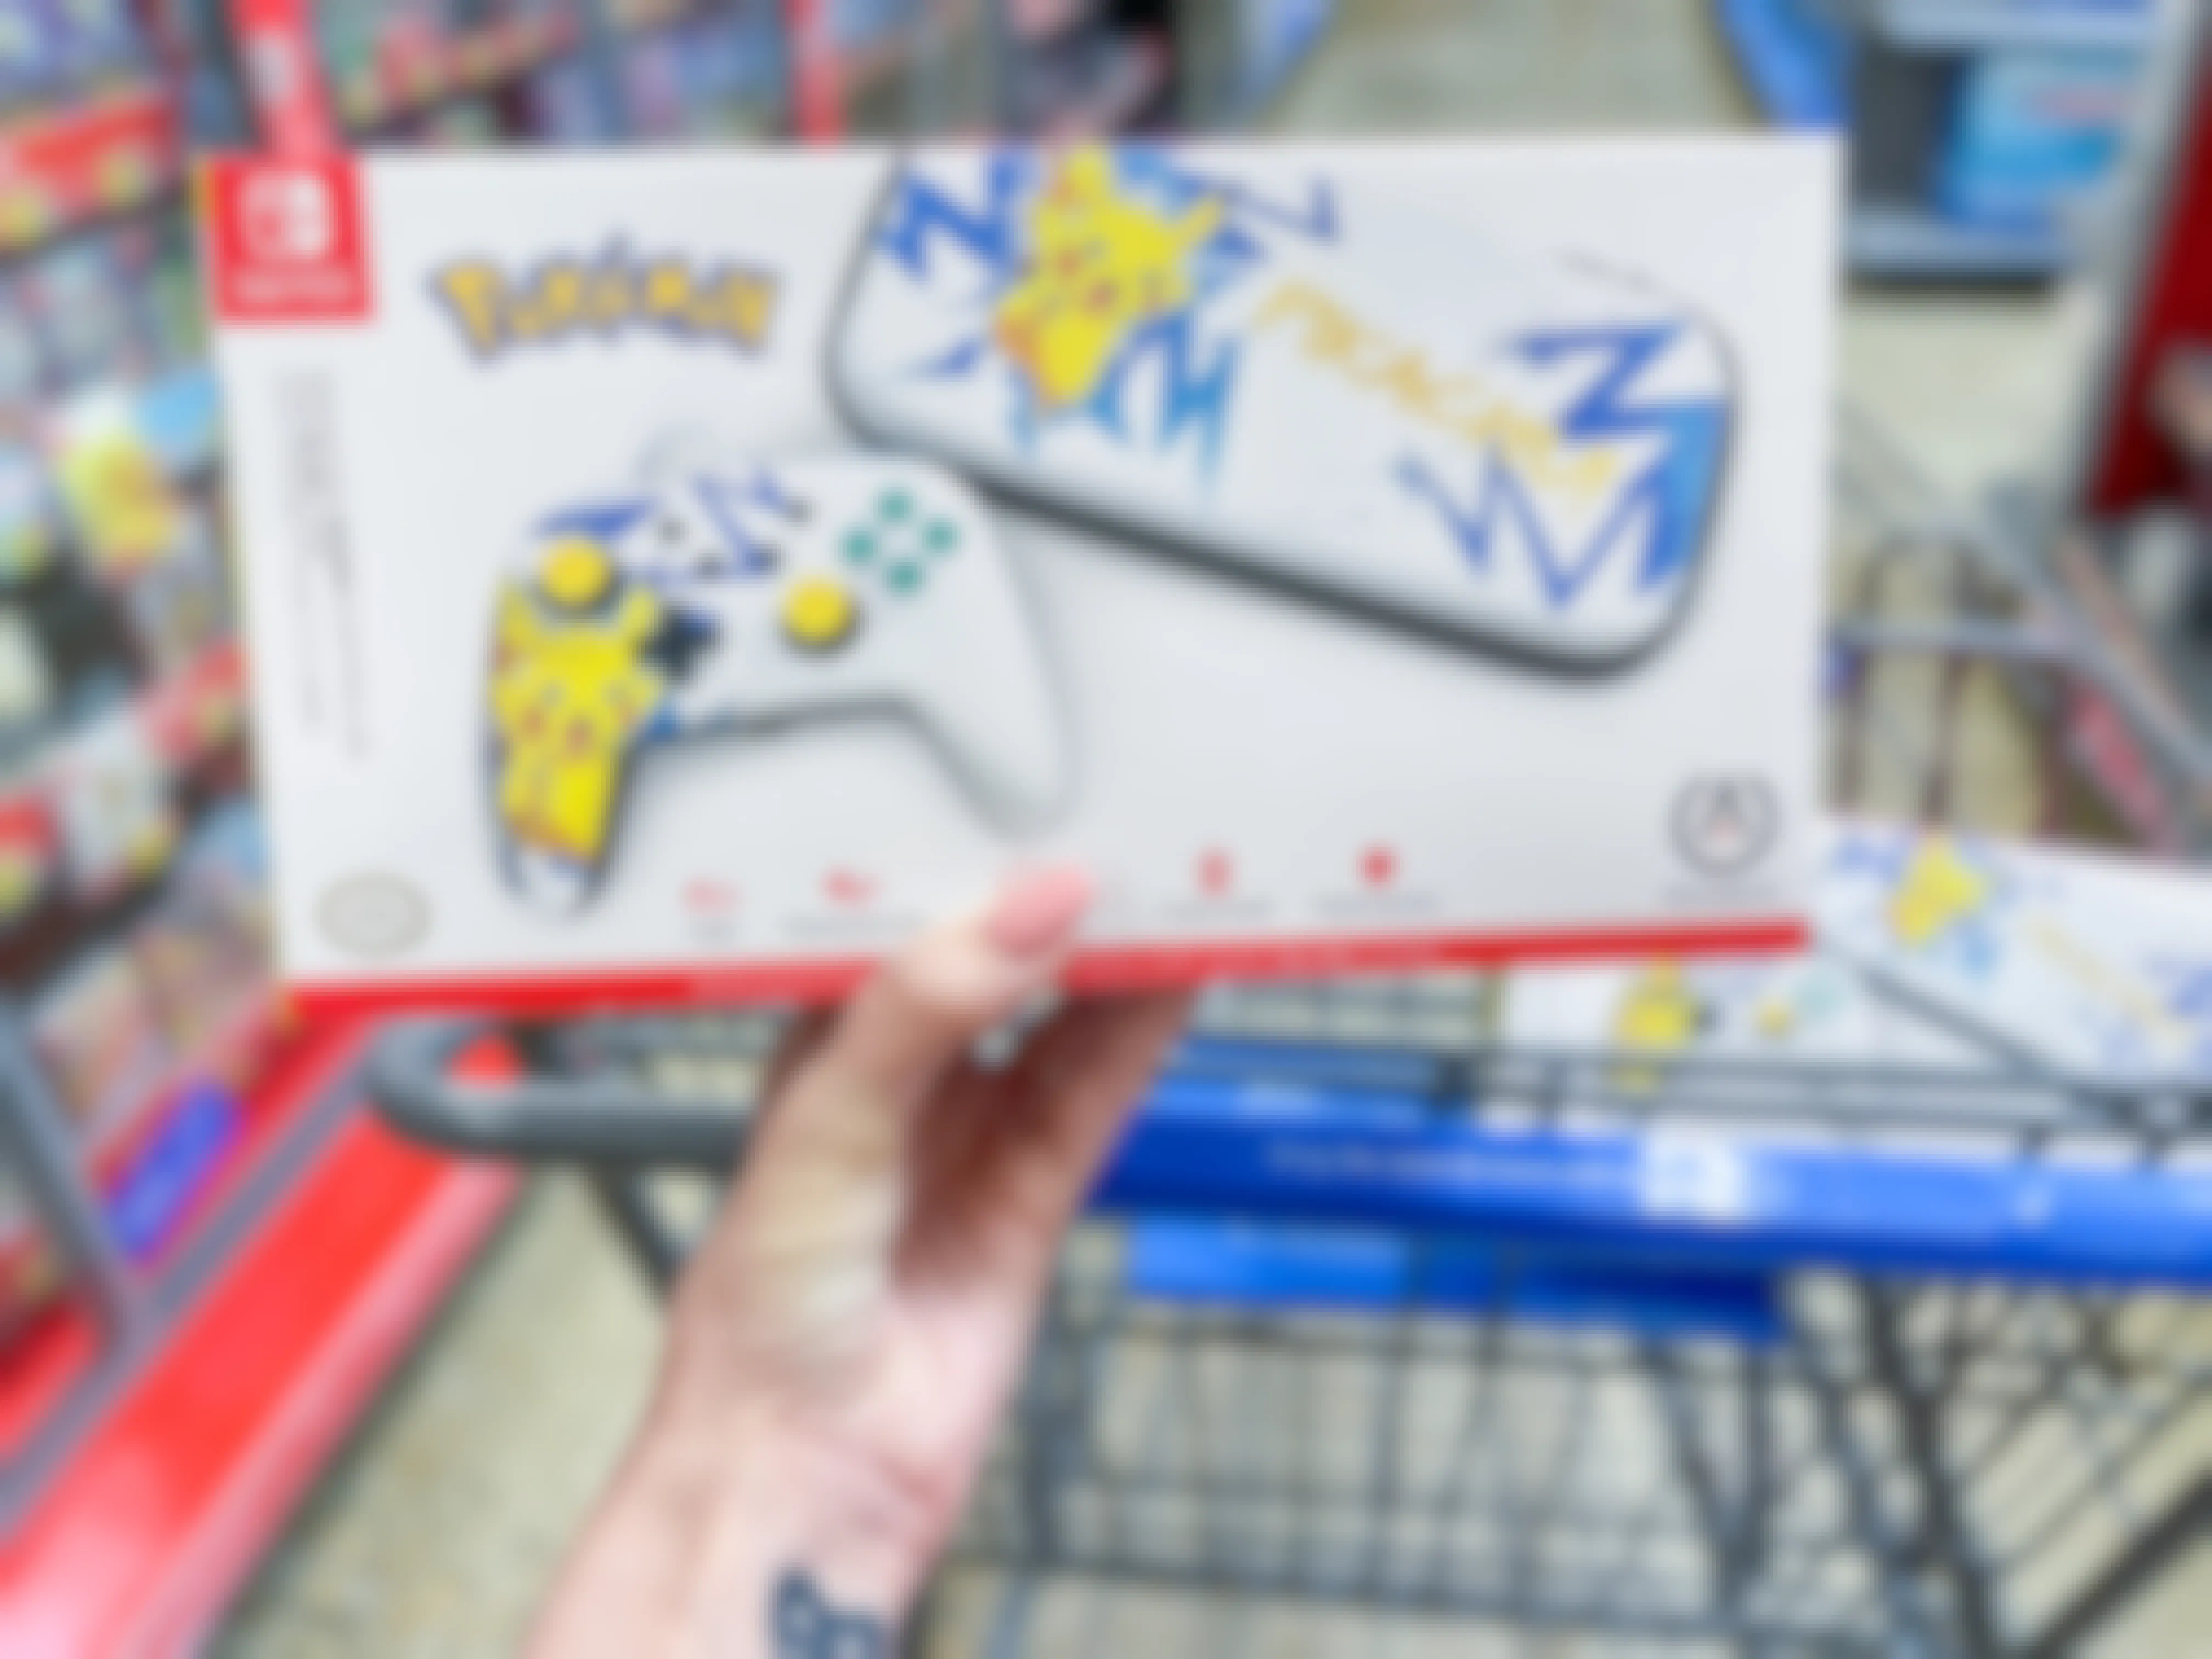 Pikachu Nintendo Switch Controller & Case, Only $29.88 at Walmart